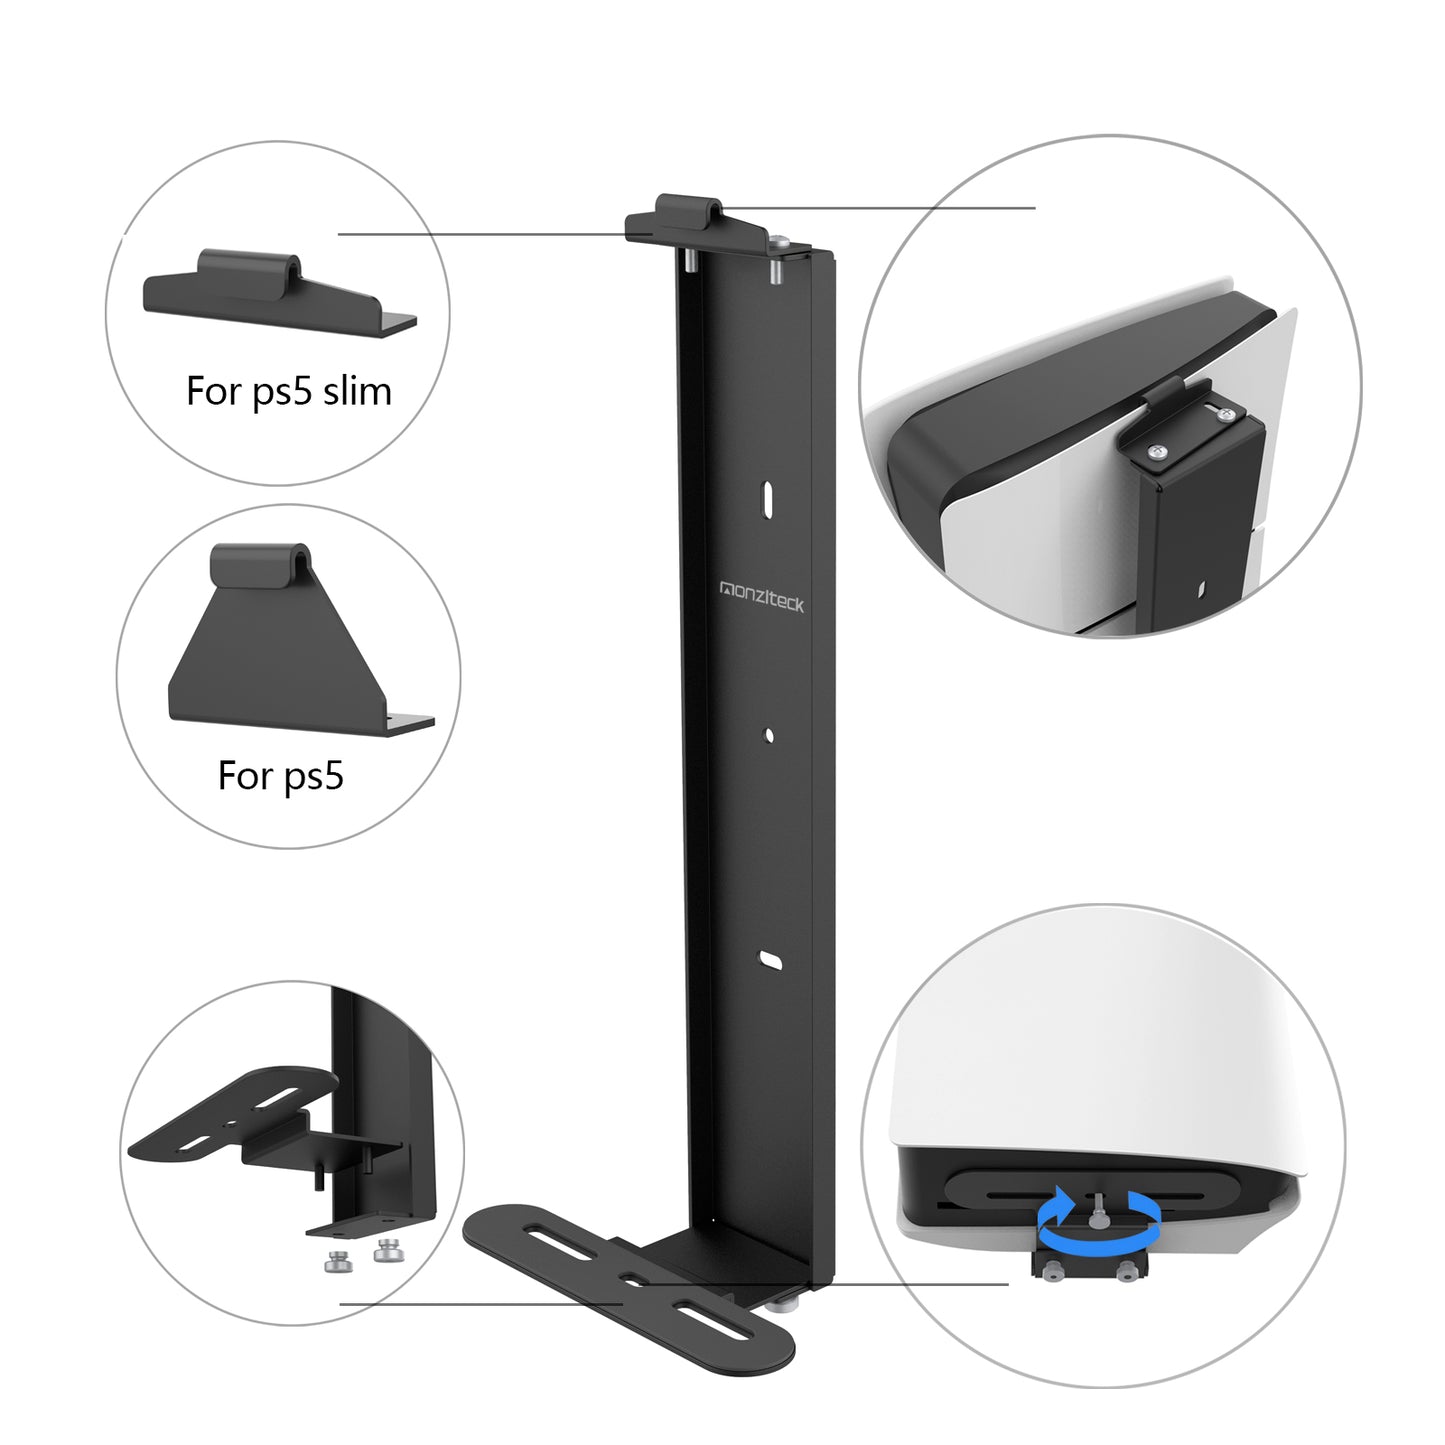 Monzlteck Wall Mount for ps5/ps5 Slim .Steel Mount Wall Holder Bracket for ps5 Original and ps5 Slim,Digital and Disc,Easy to Install